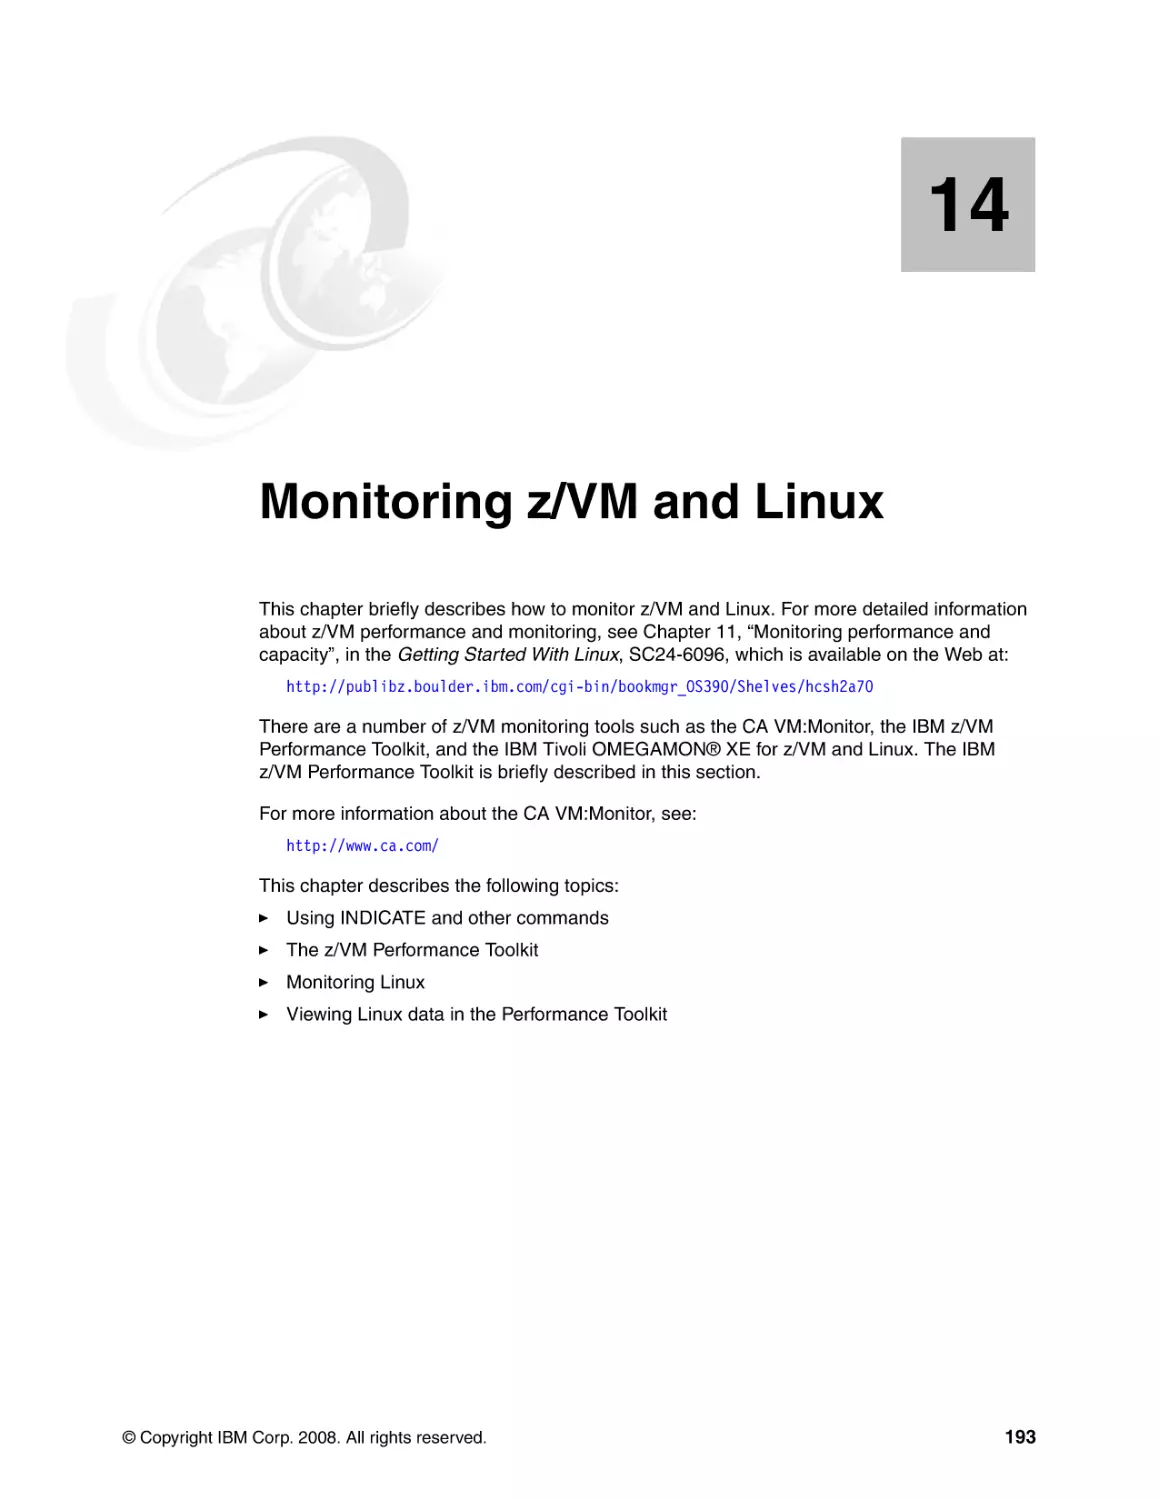 Chapter 14. Monitoring z/VM and Linux